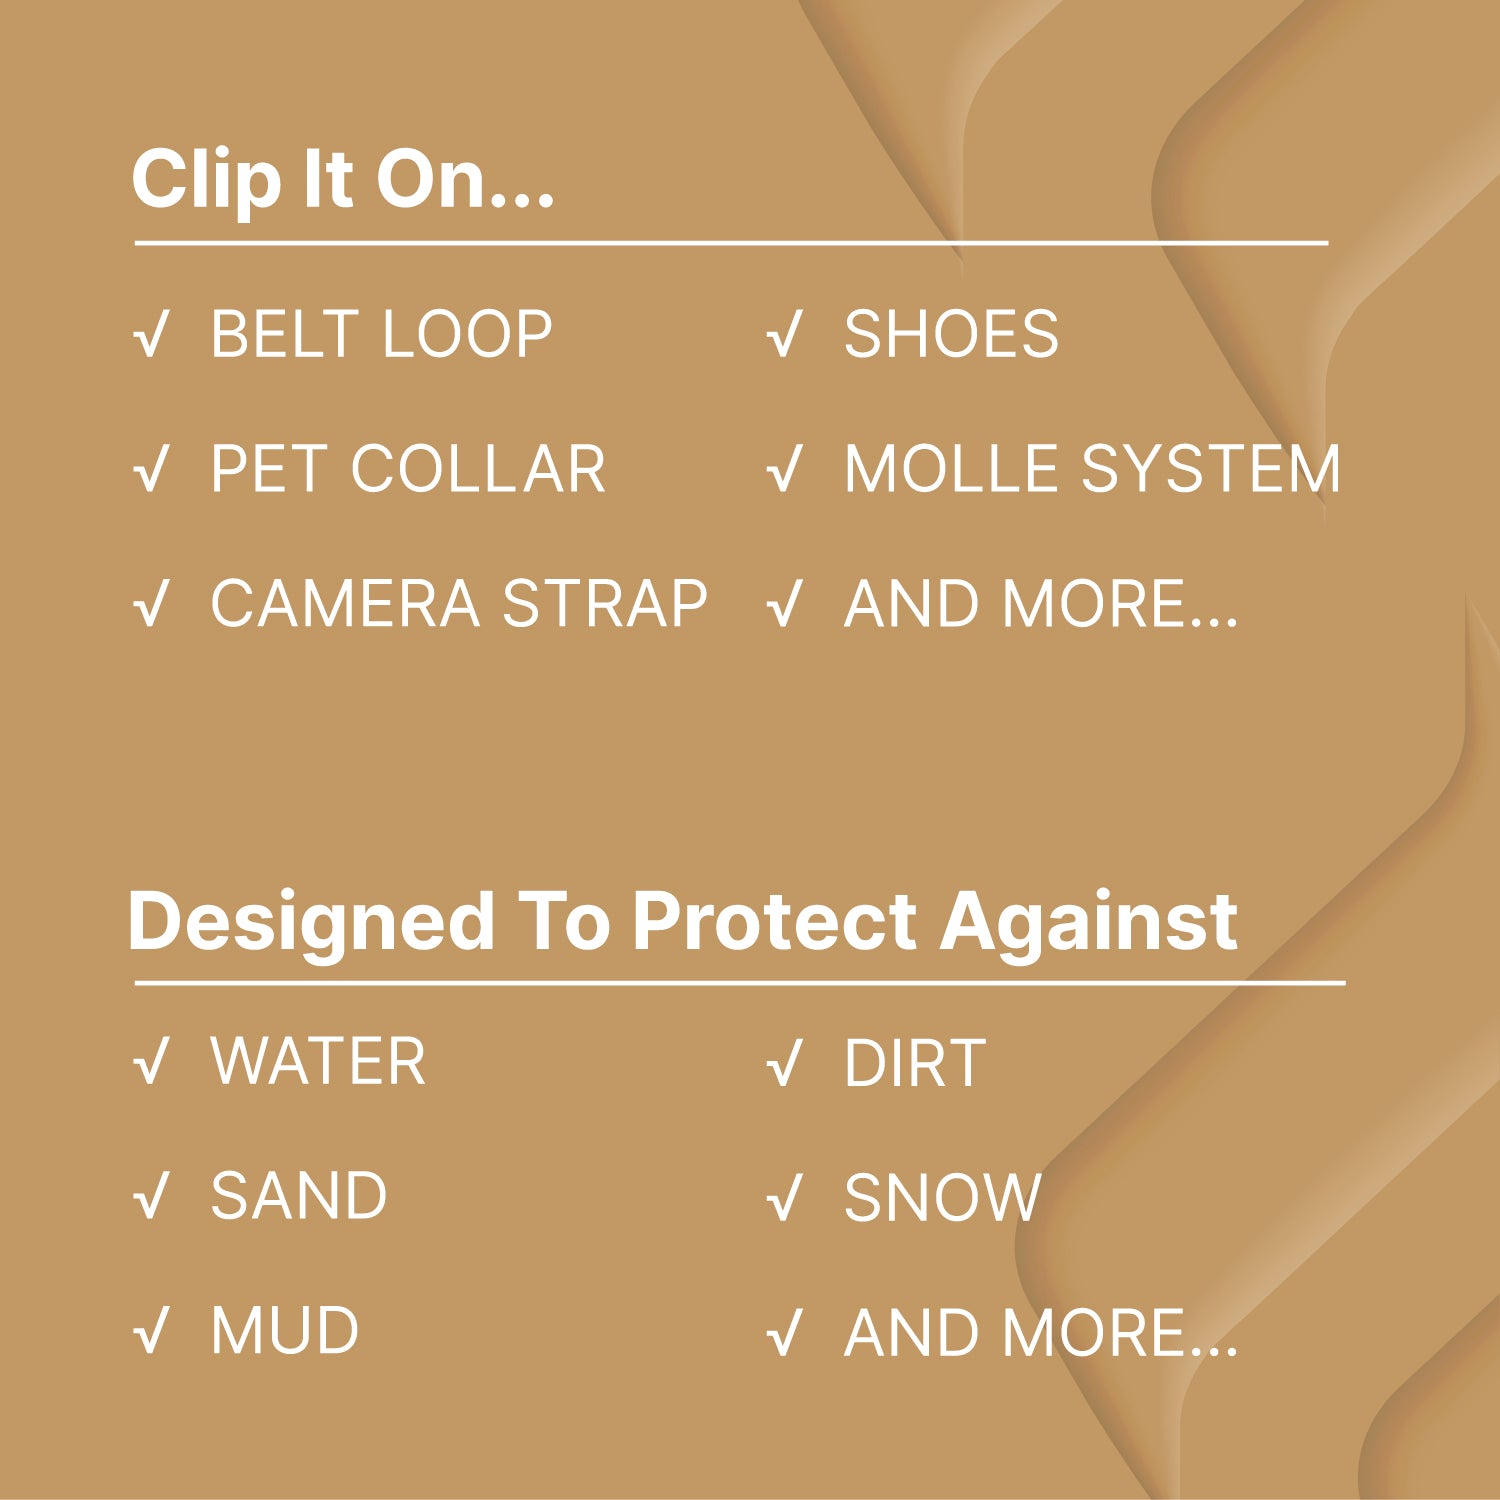 Catalyst total protection clip it usage Text reads clip it on belt loop shoes pet collar camera strap molle system and more designed to protect against water dirt sand mud snow and more